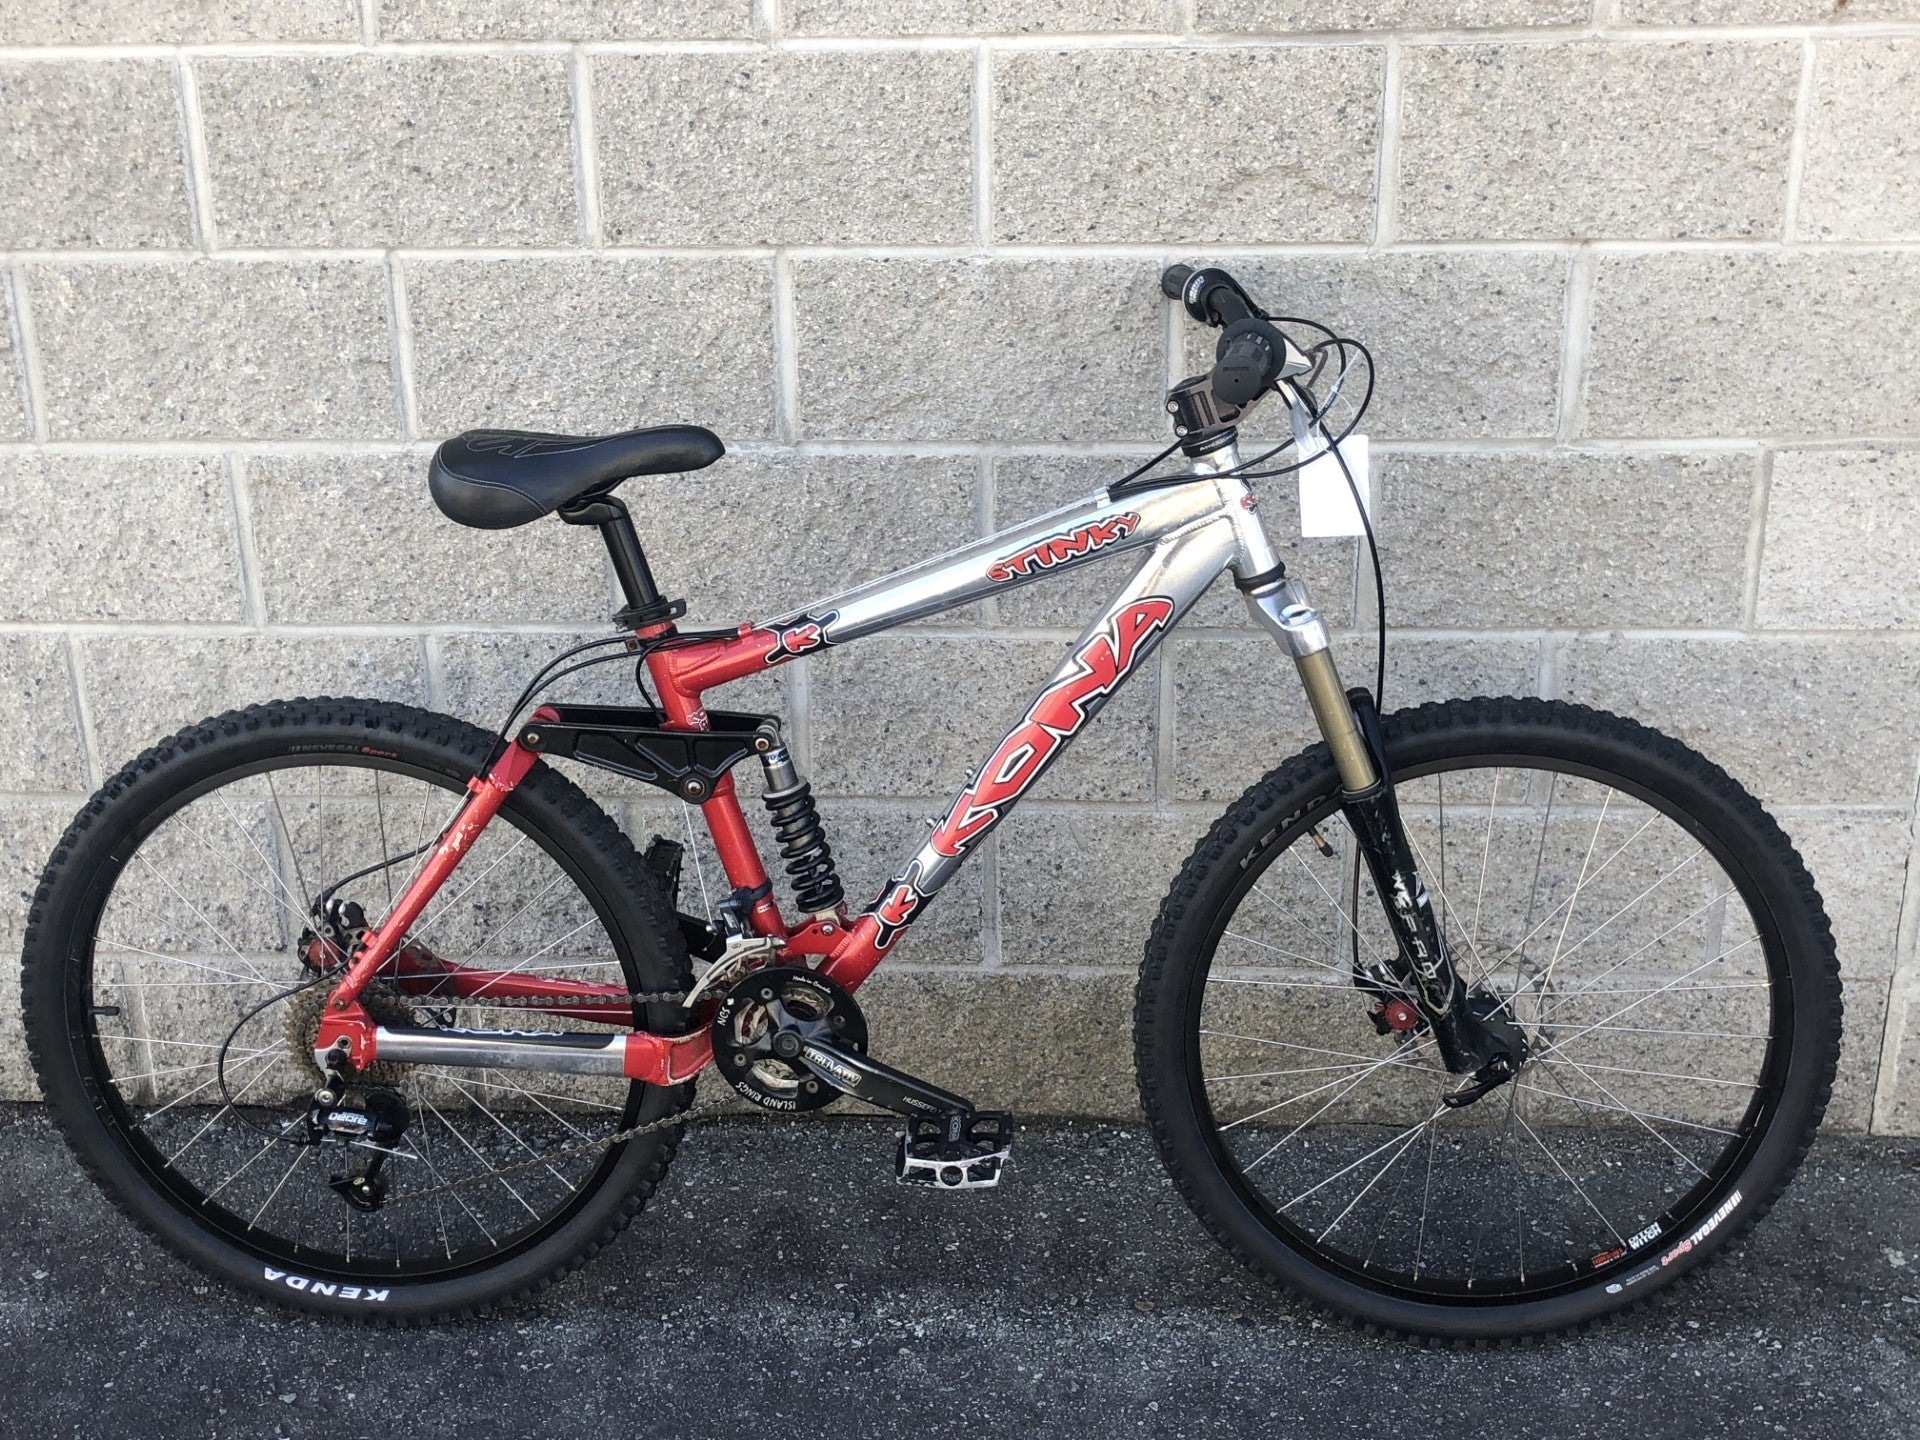 KONA STINKY MTN BIKE SZ M SILVER/RED DUAL SUSP-Sports Replay - Sports Excellence-Sports Replay - Sports Excellence